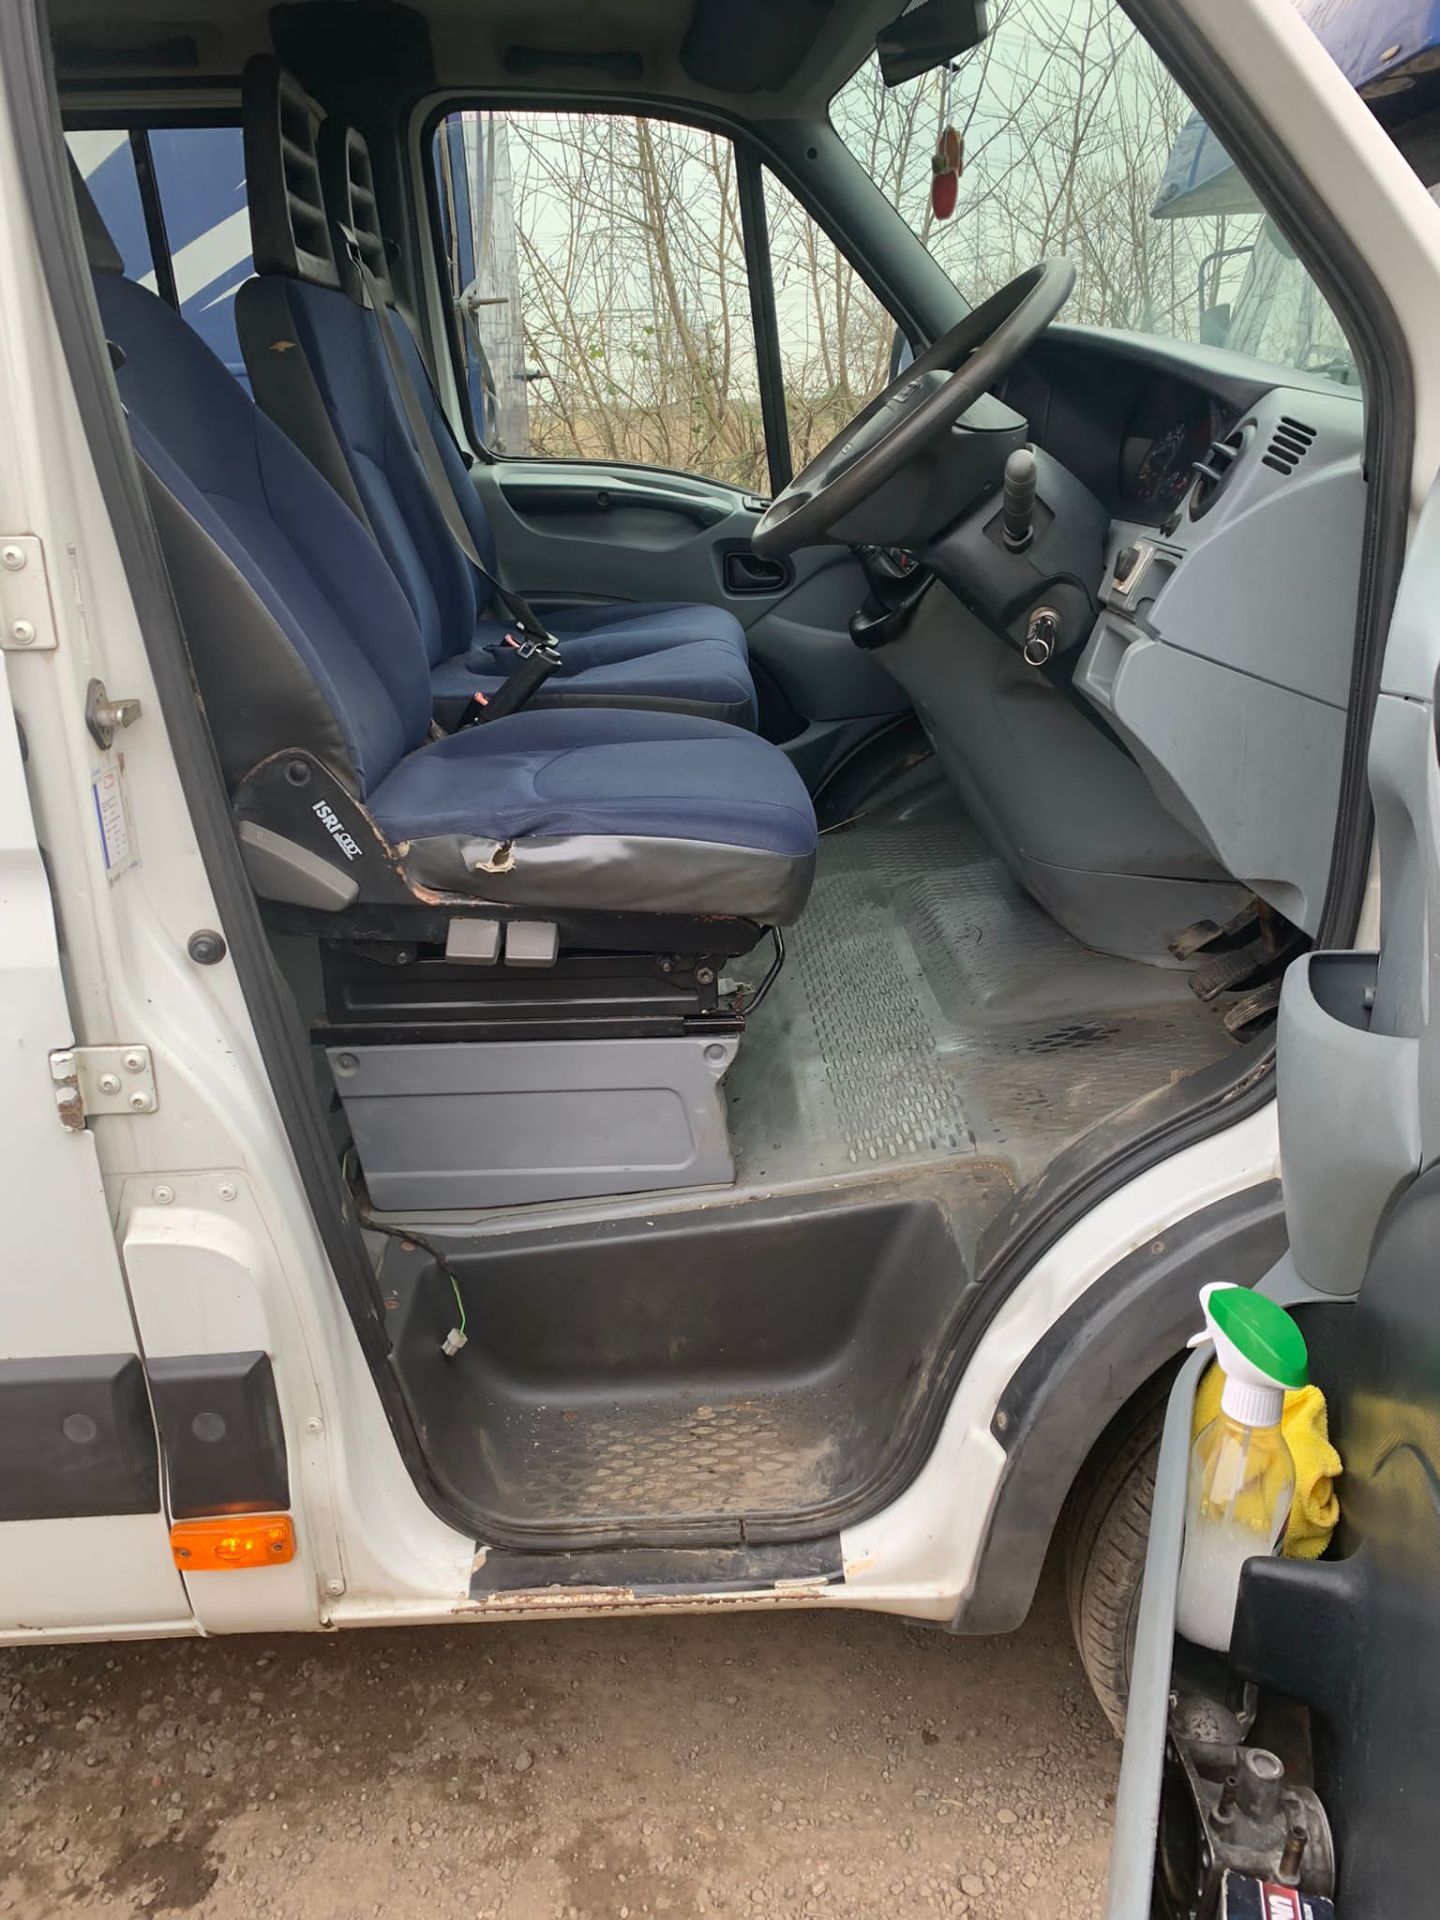 2006 IVECO DAILY 5TON CREW CAB TIPPER - Image 11 of 11